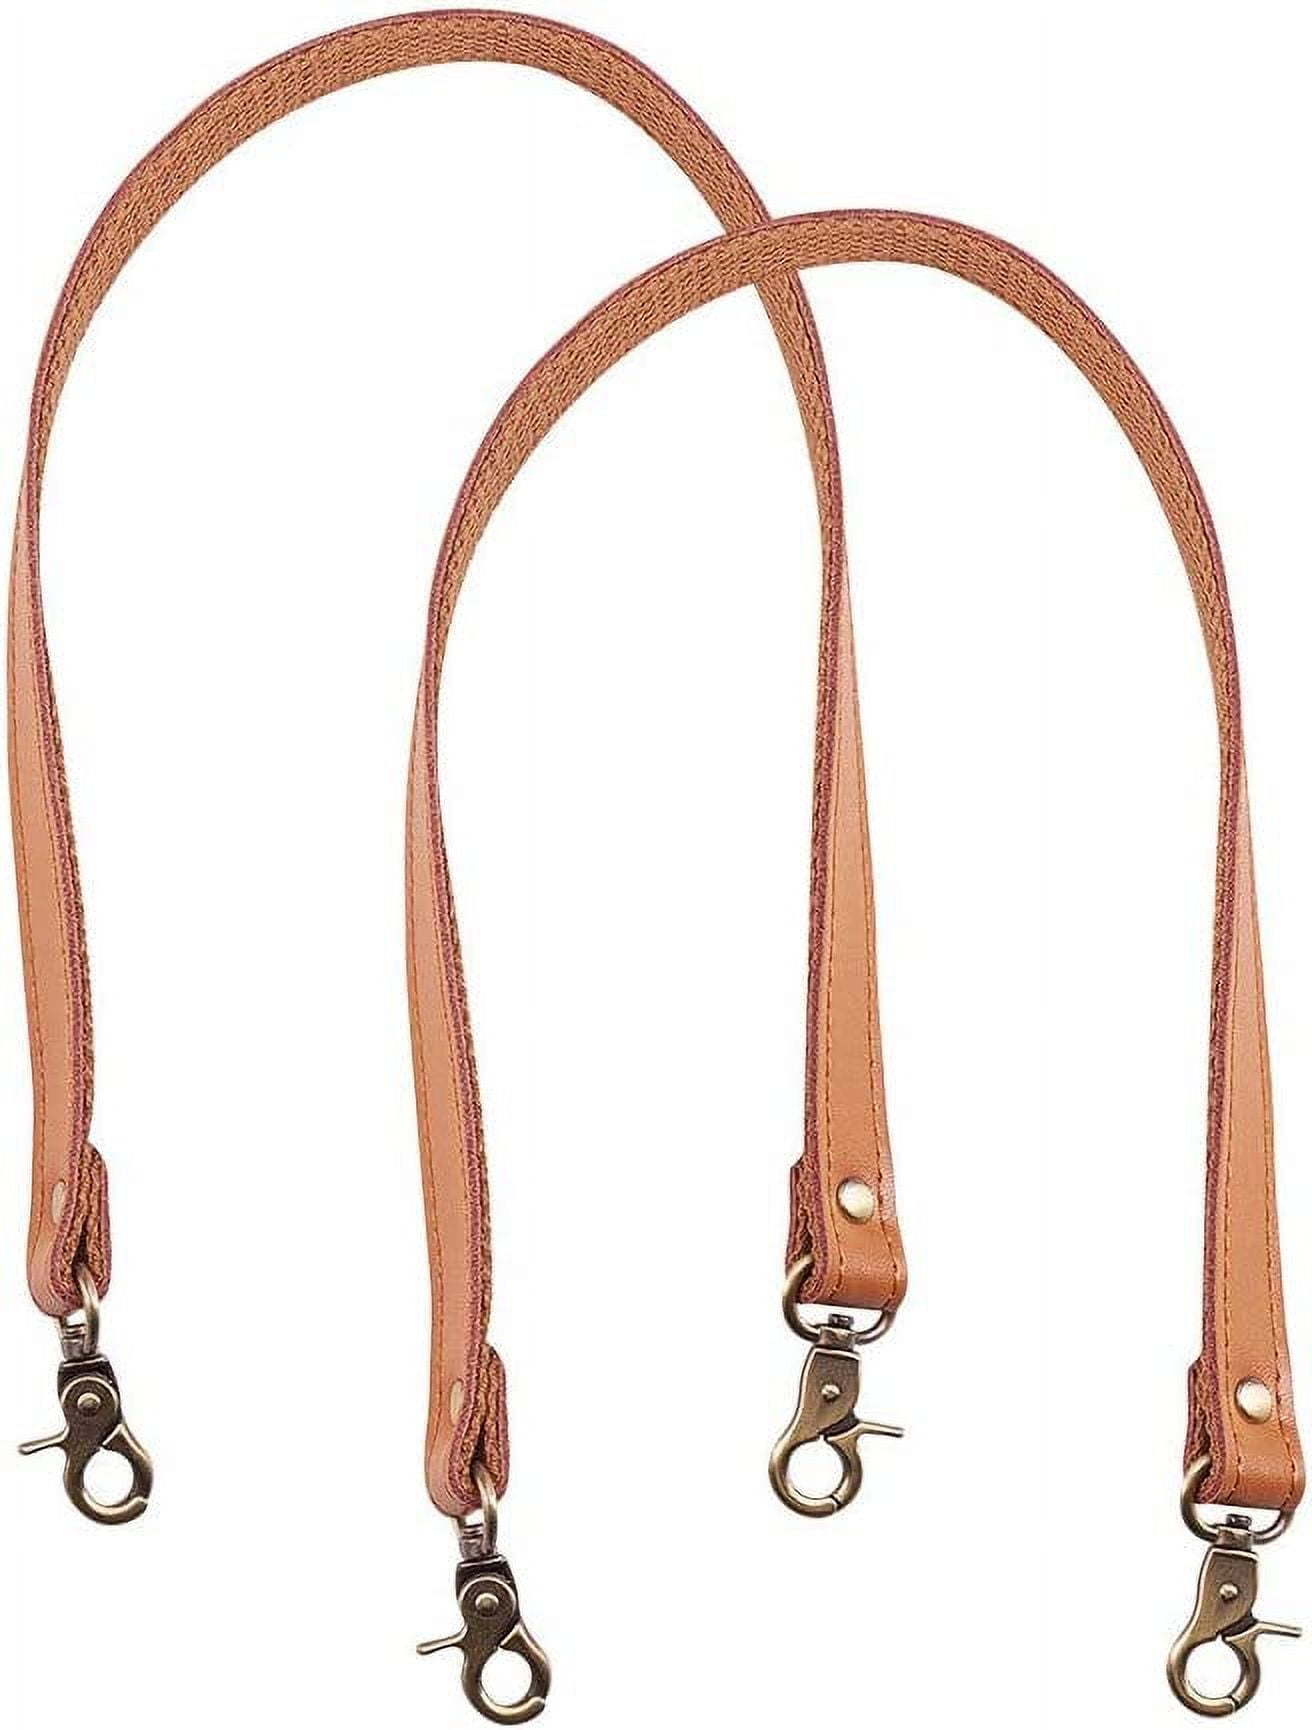 2 pcs Brown Leather Purse Strap Replacement Handles 20mm Wide